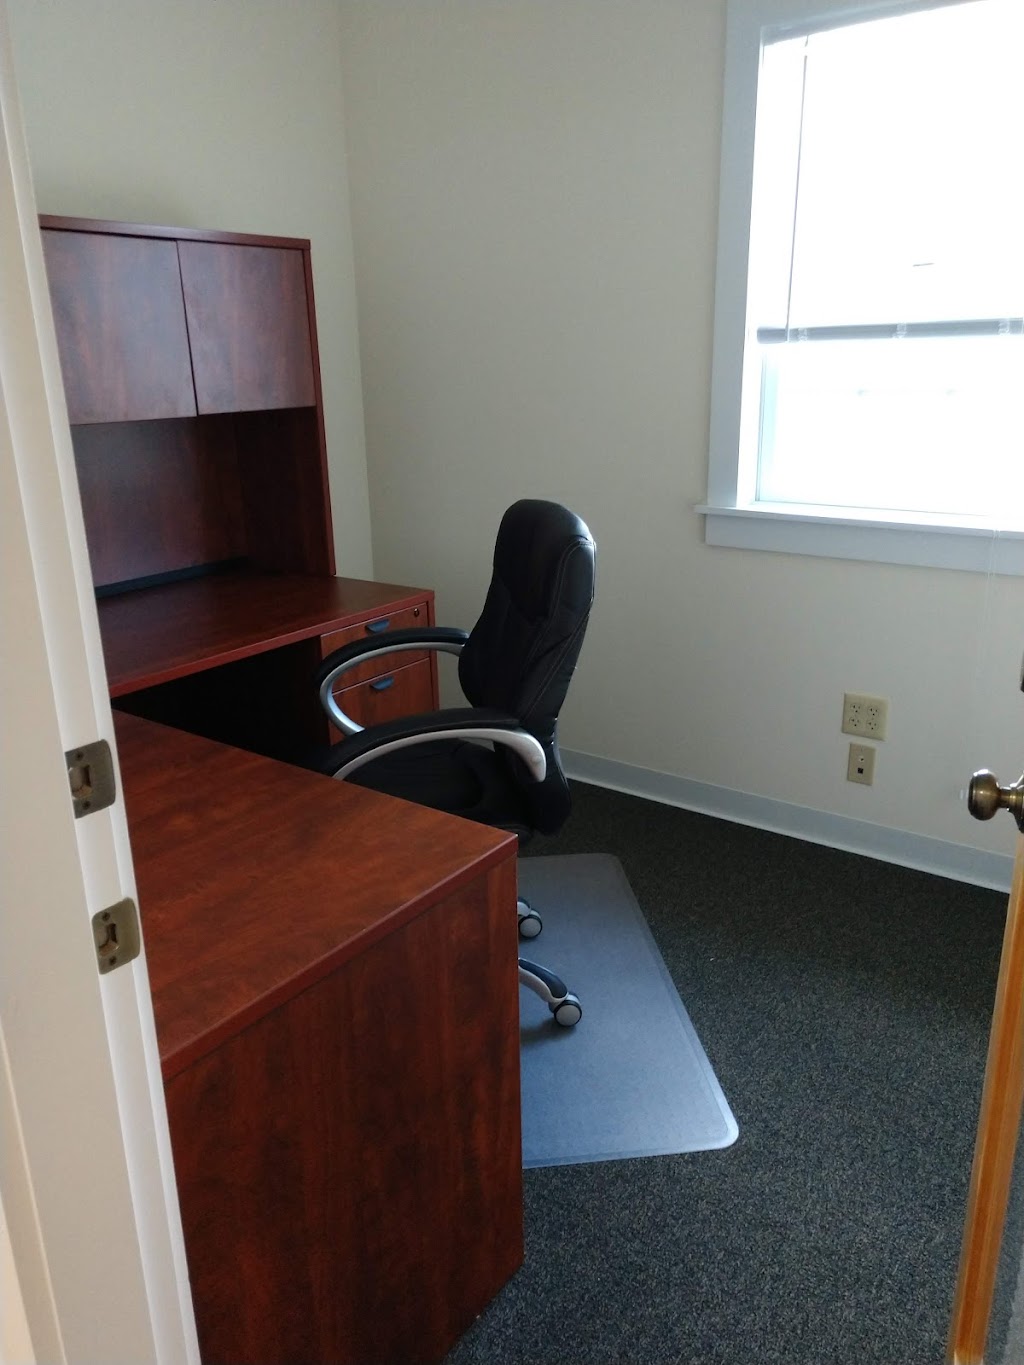 Global Office Suites | 3814 US-44, Millbrook, NY 12545 | Phone: (845) 605-1500